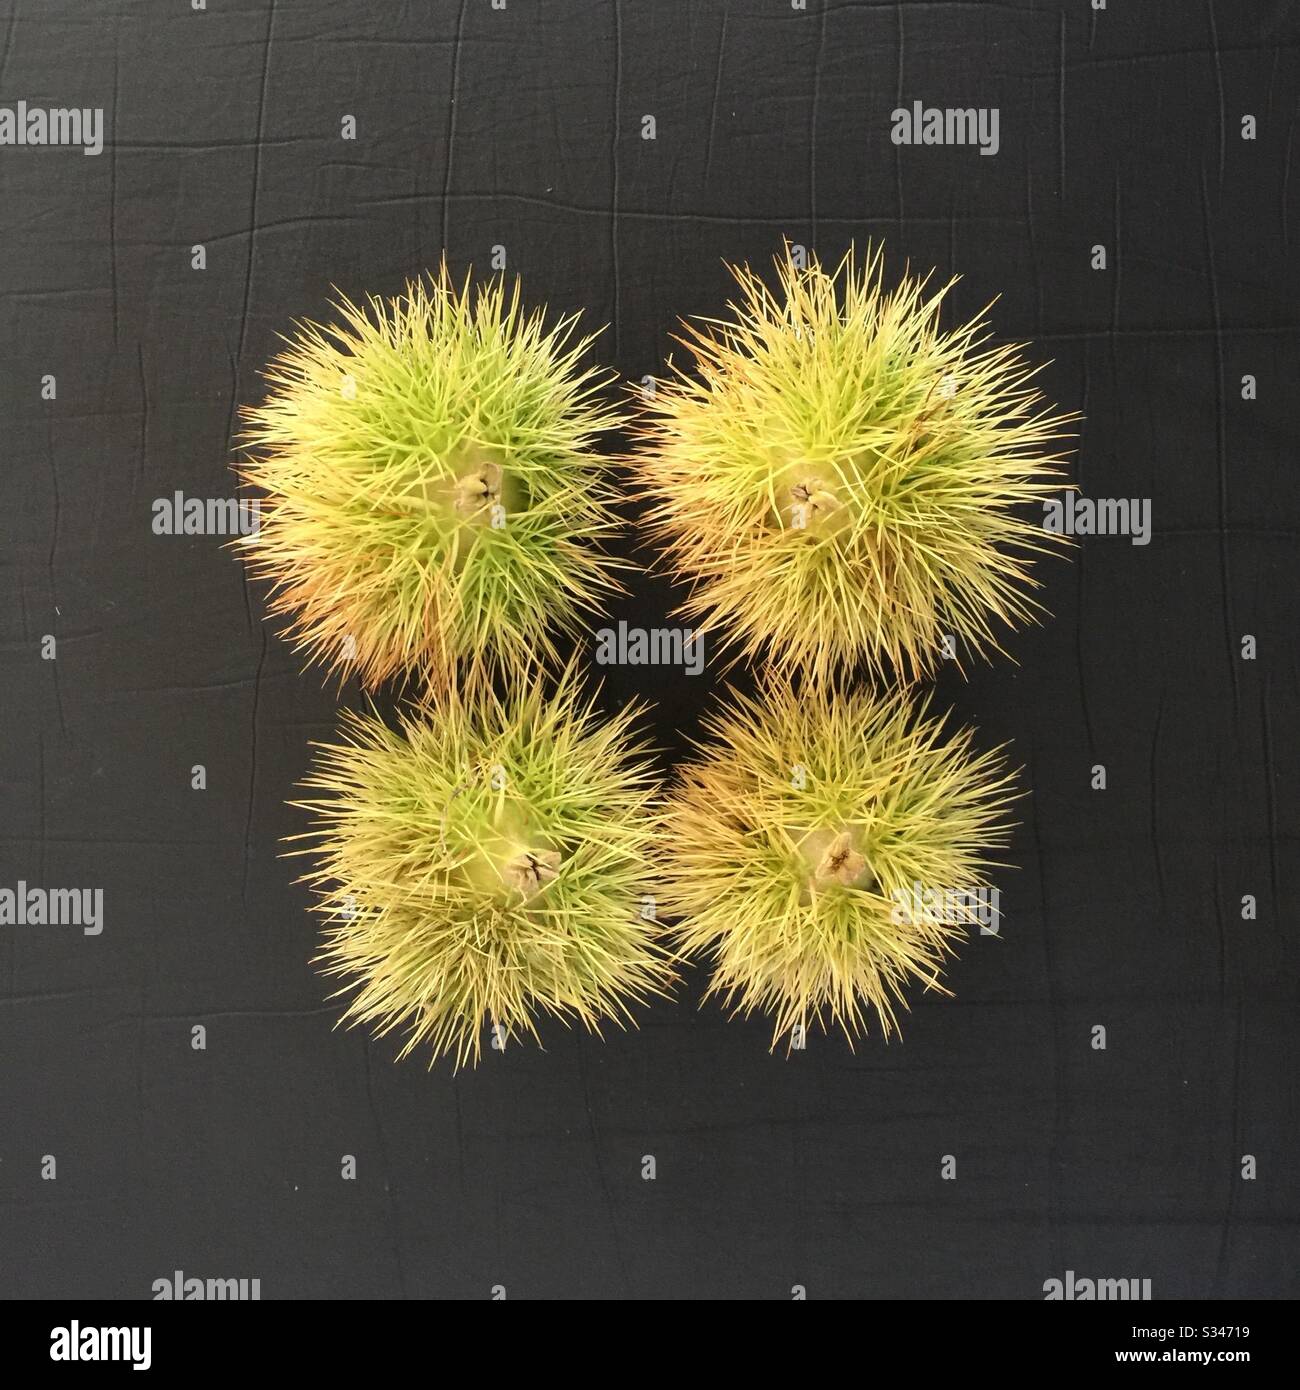 4 spiky meddle seed heads, artistically presented Stock Photo